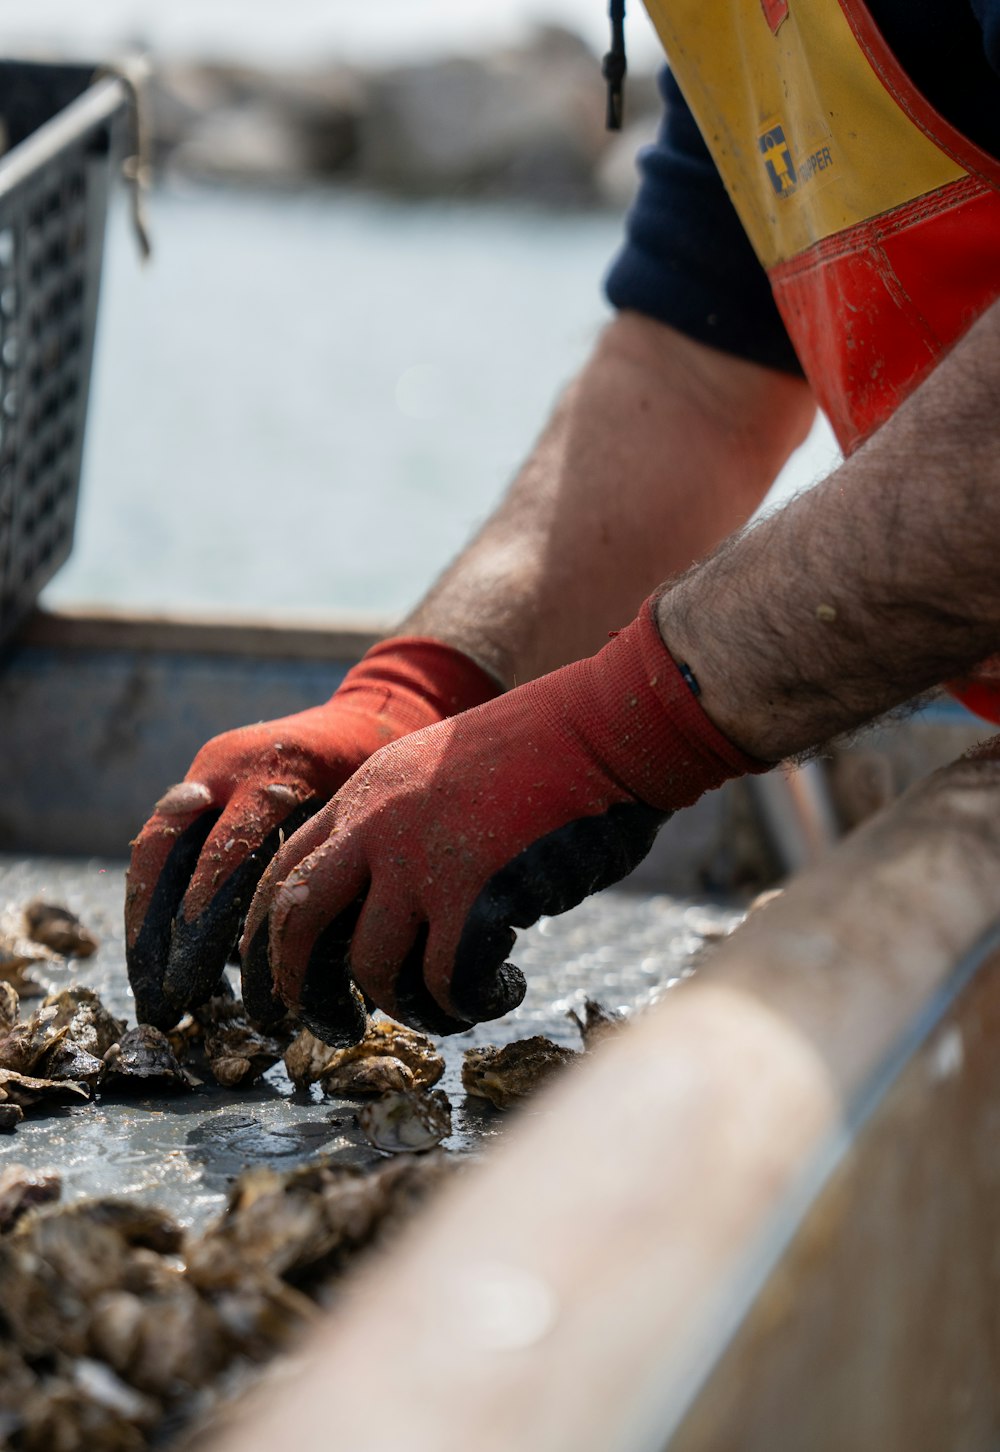 a man in a yellow shirt and red gloves is sorting oysters